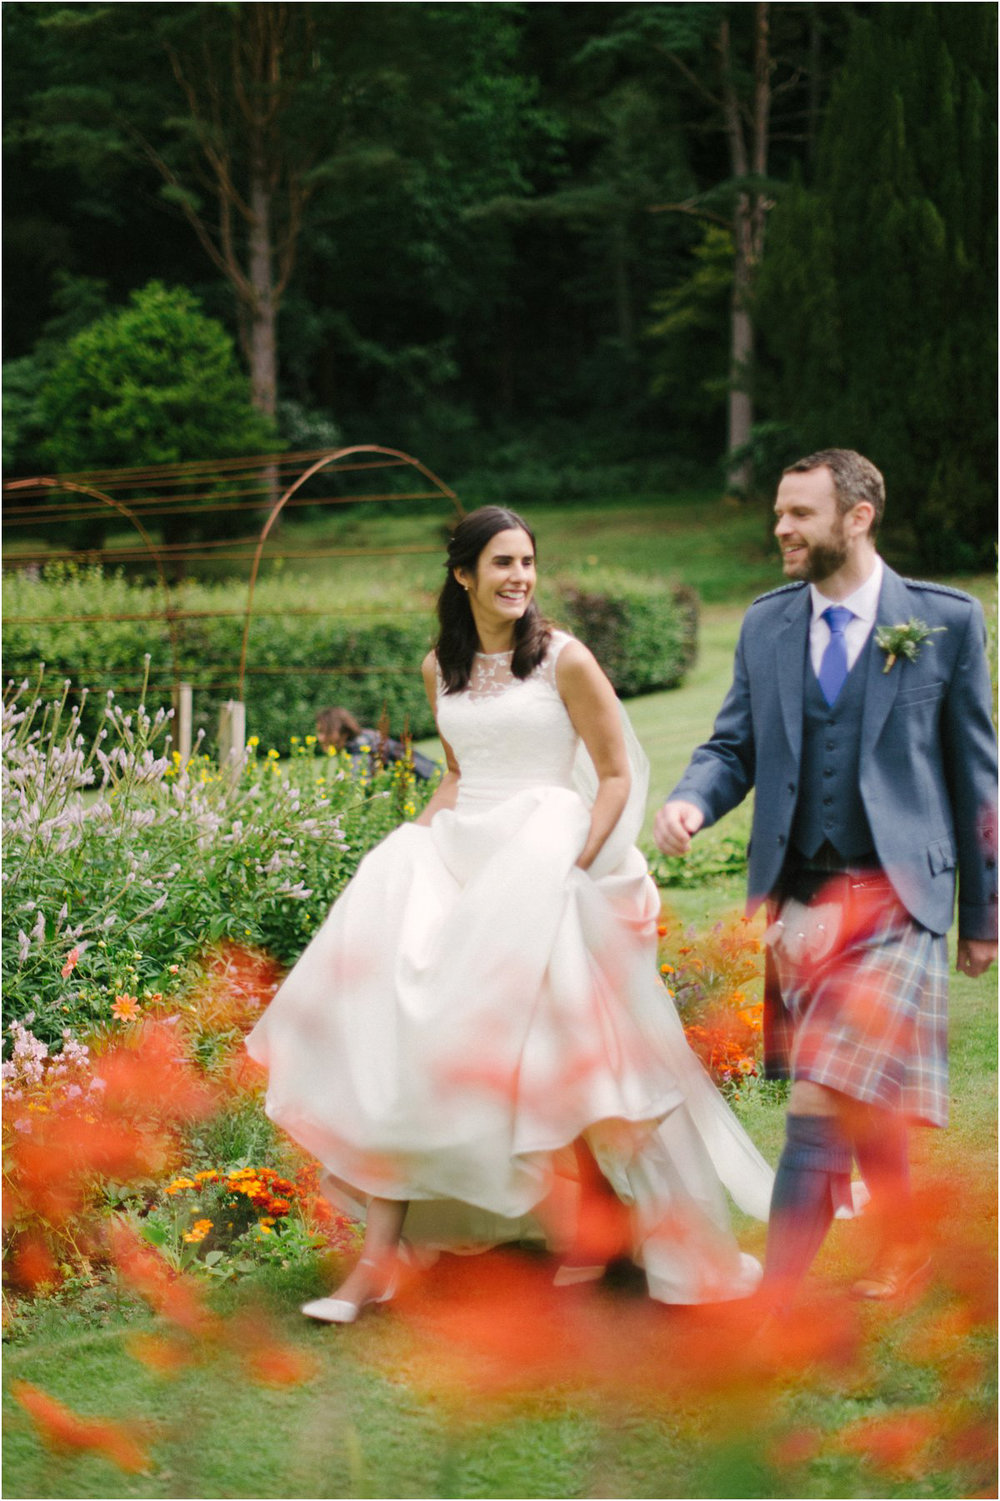  Newly married couple walking among red flowers in a garden of Blairquhan castle in Scotland by Cro & Kow 